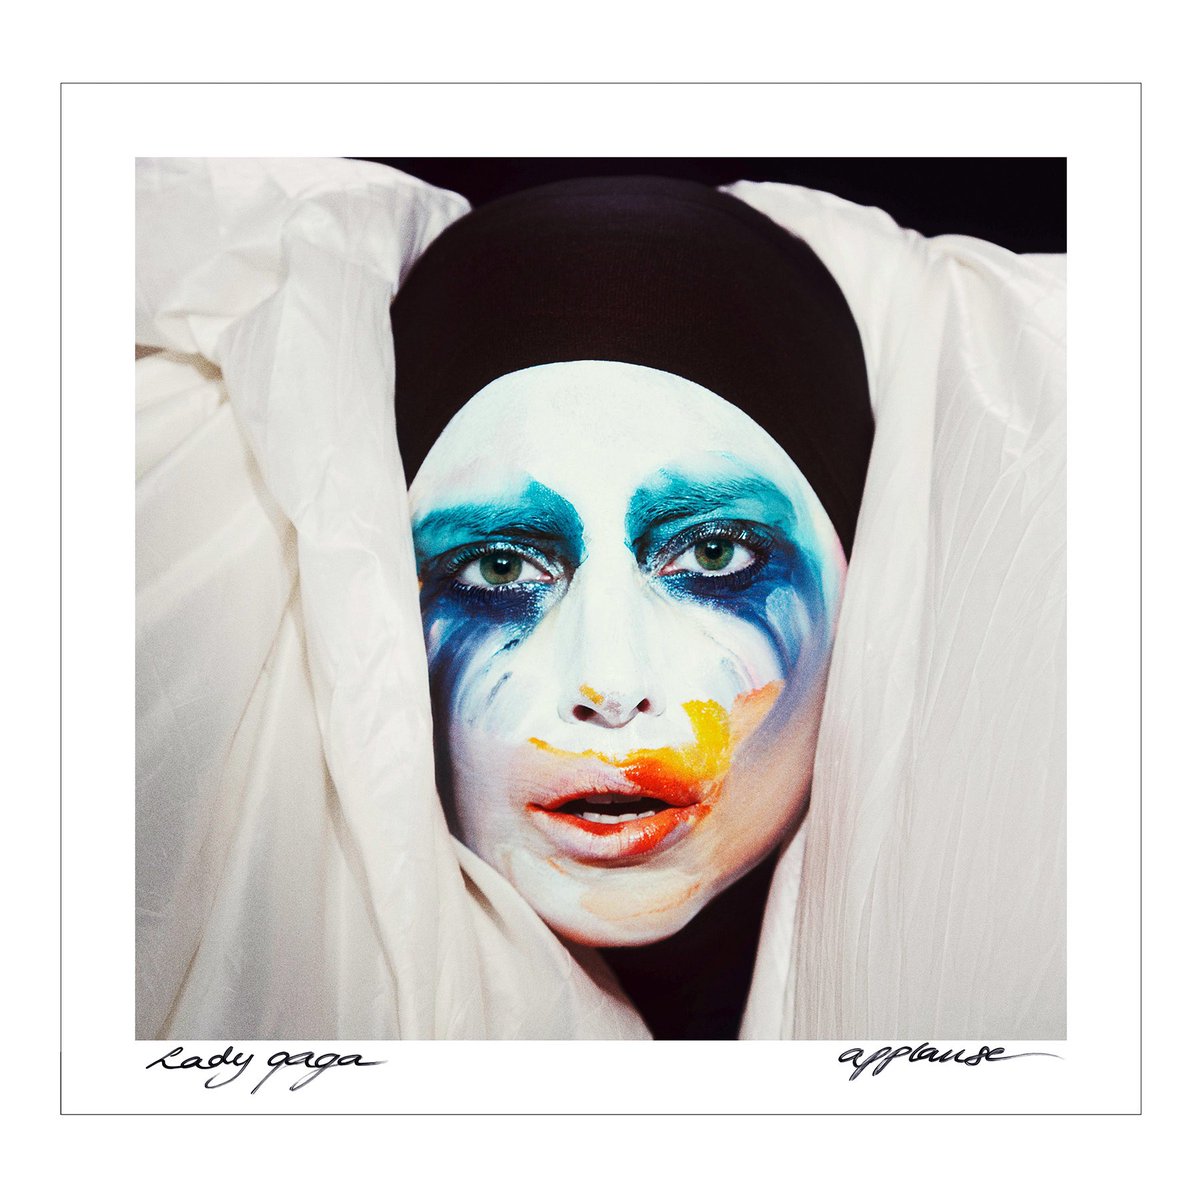 .@ladygaga’s “Applause” is now 5X PLATINUM (400,000) certified in Canada.🇨🇦